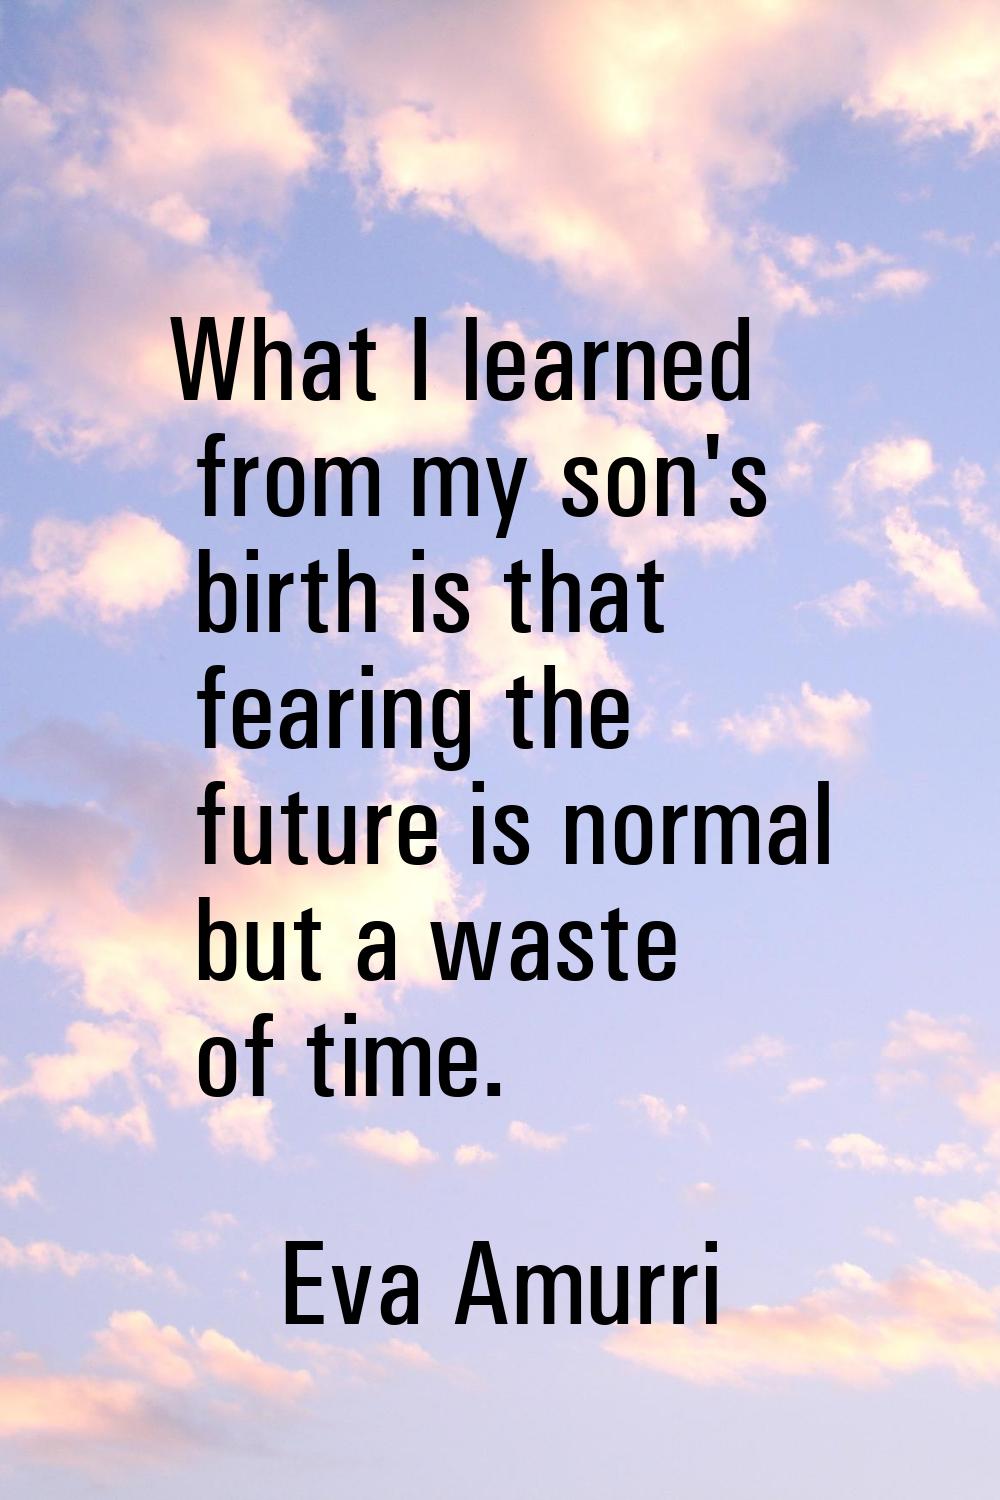 What I learned from my son's birth is that fearing the future is normal but a waste of time.